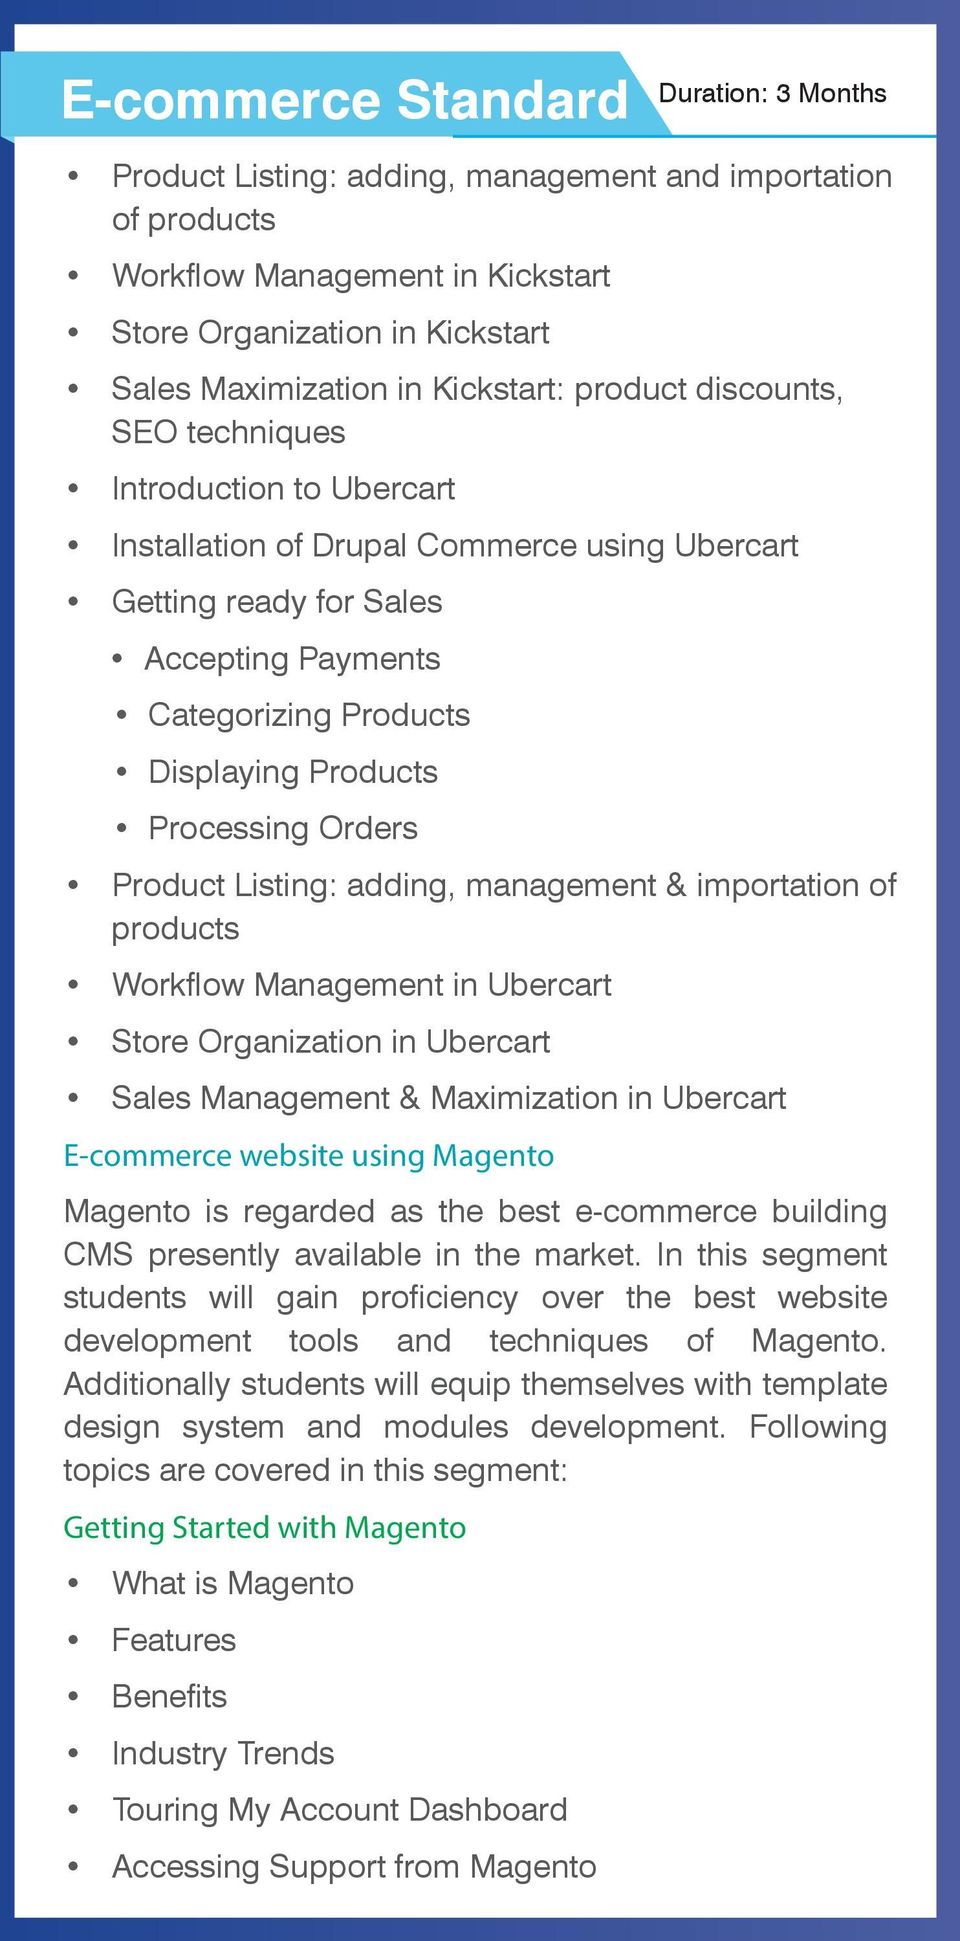 management & importation of products Workflow Management in Ubercart Store Organization in Ubercart Sales Management & Maximization in Ubercart E-commerce website using Magento Magento is regarded as